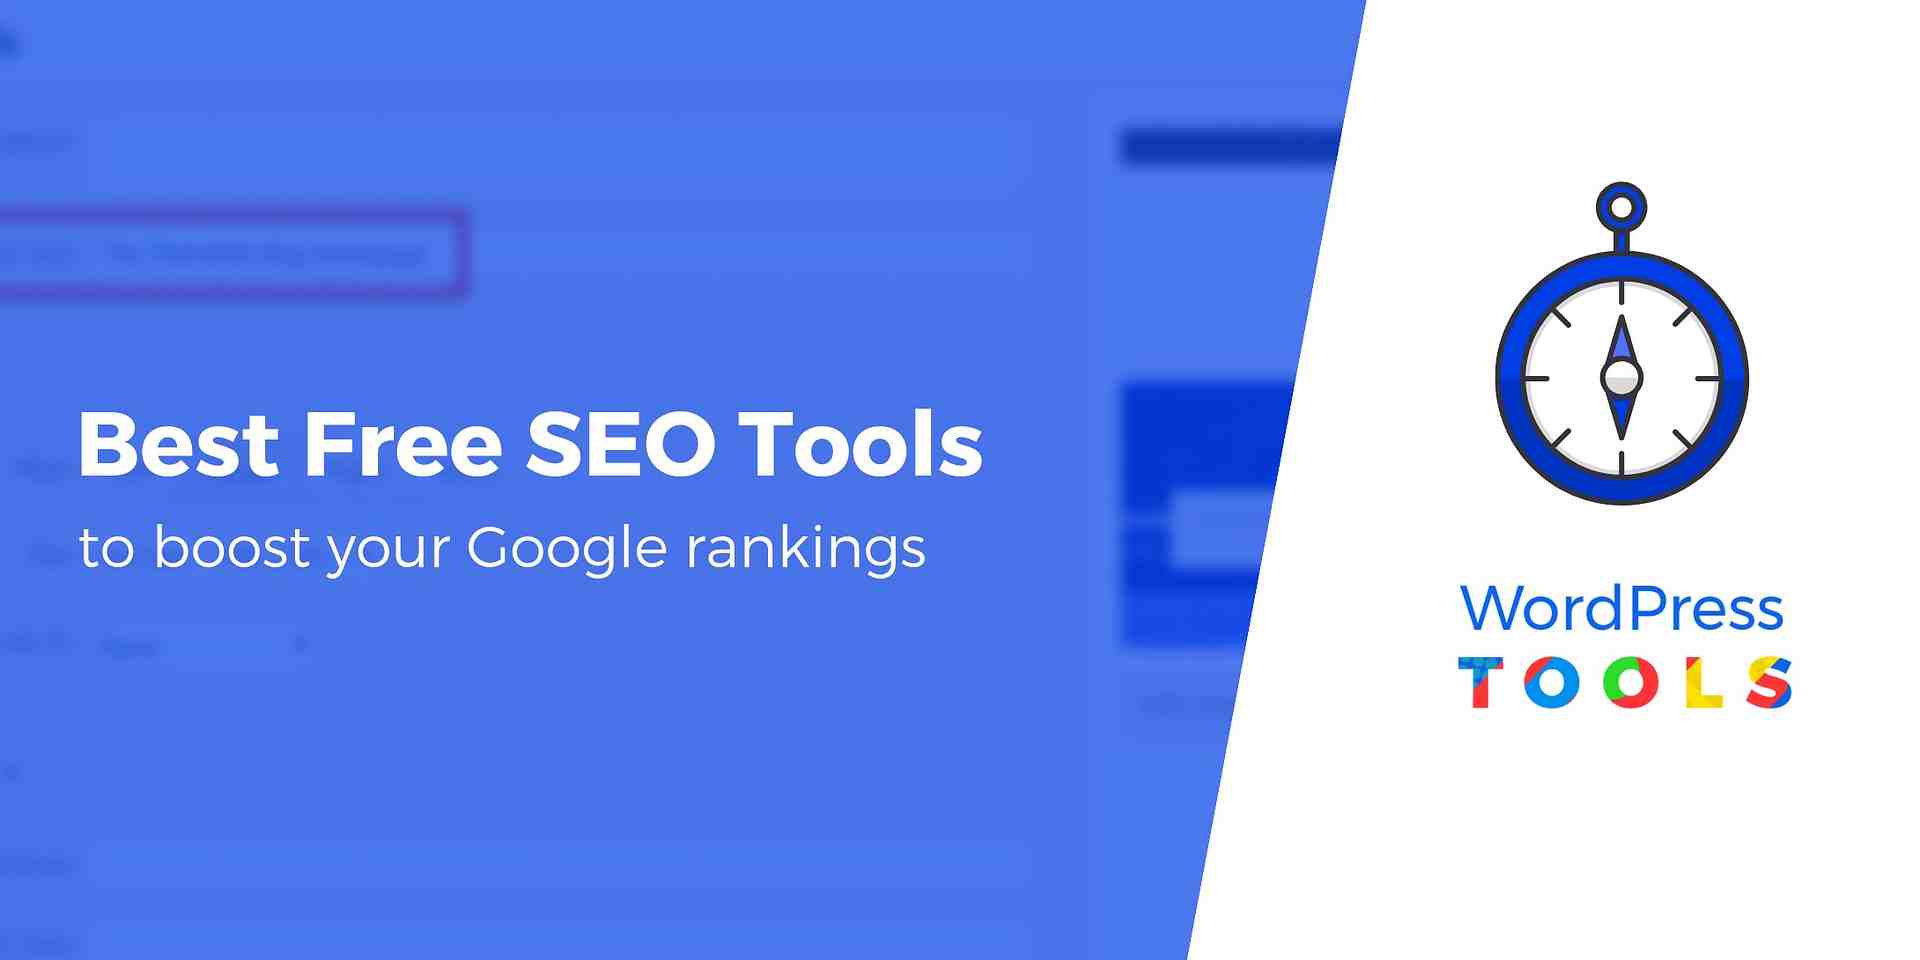 What Are The Best Free SEO Tools?